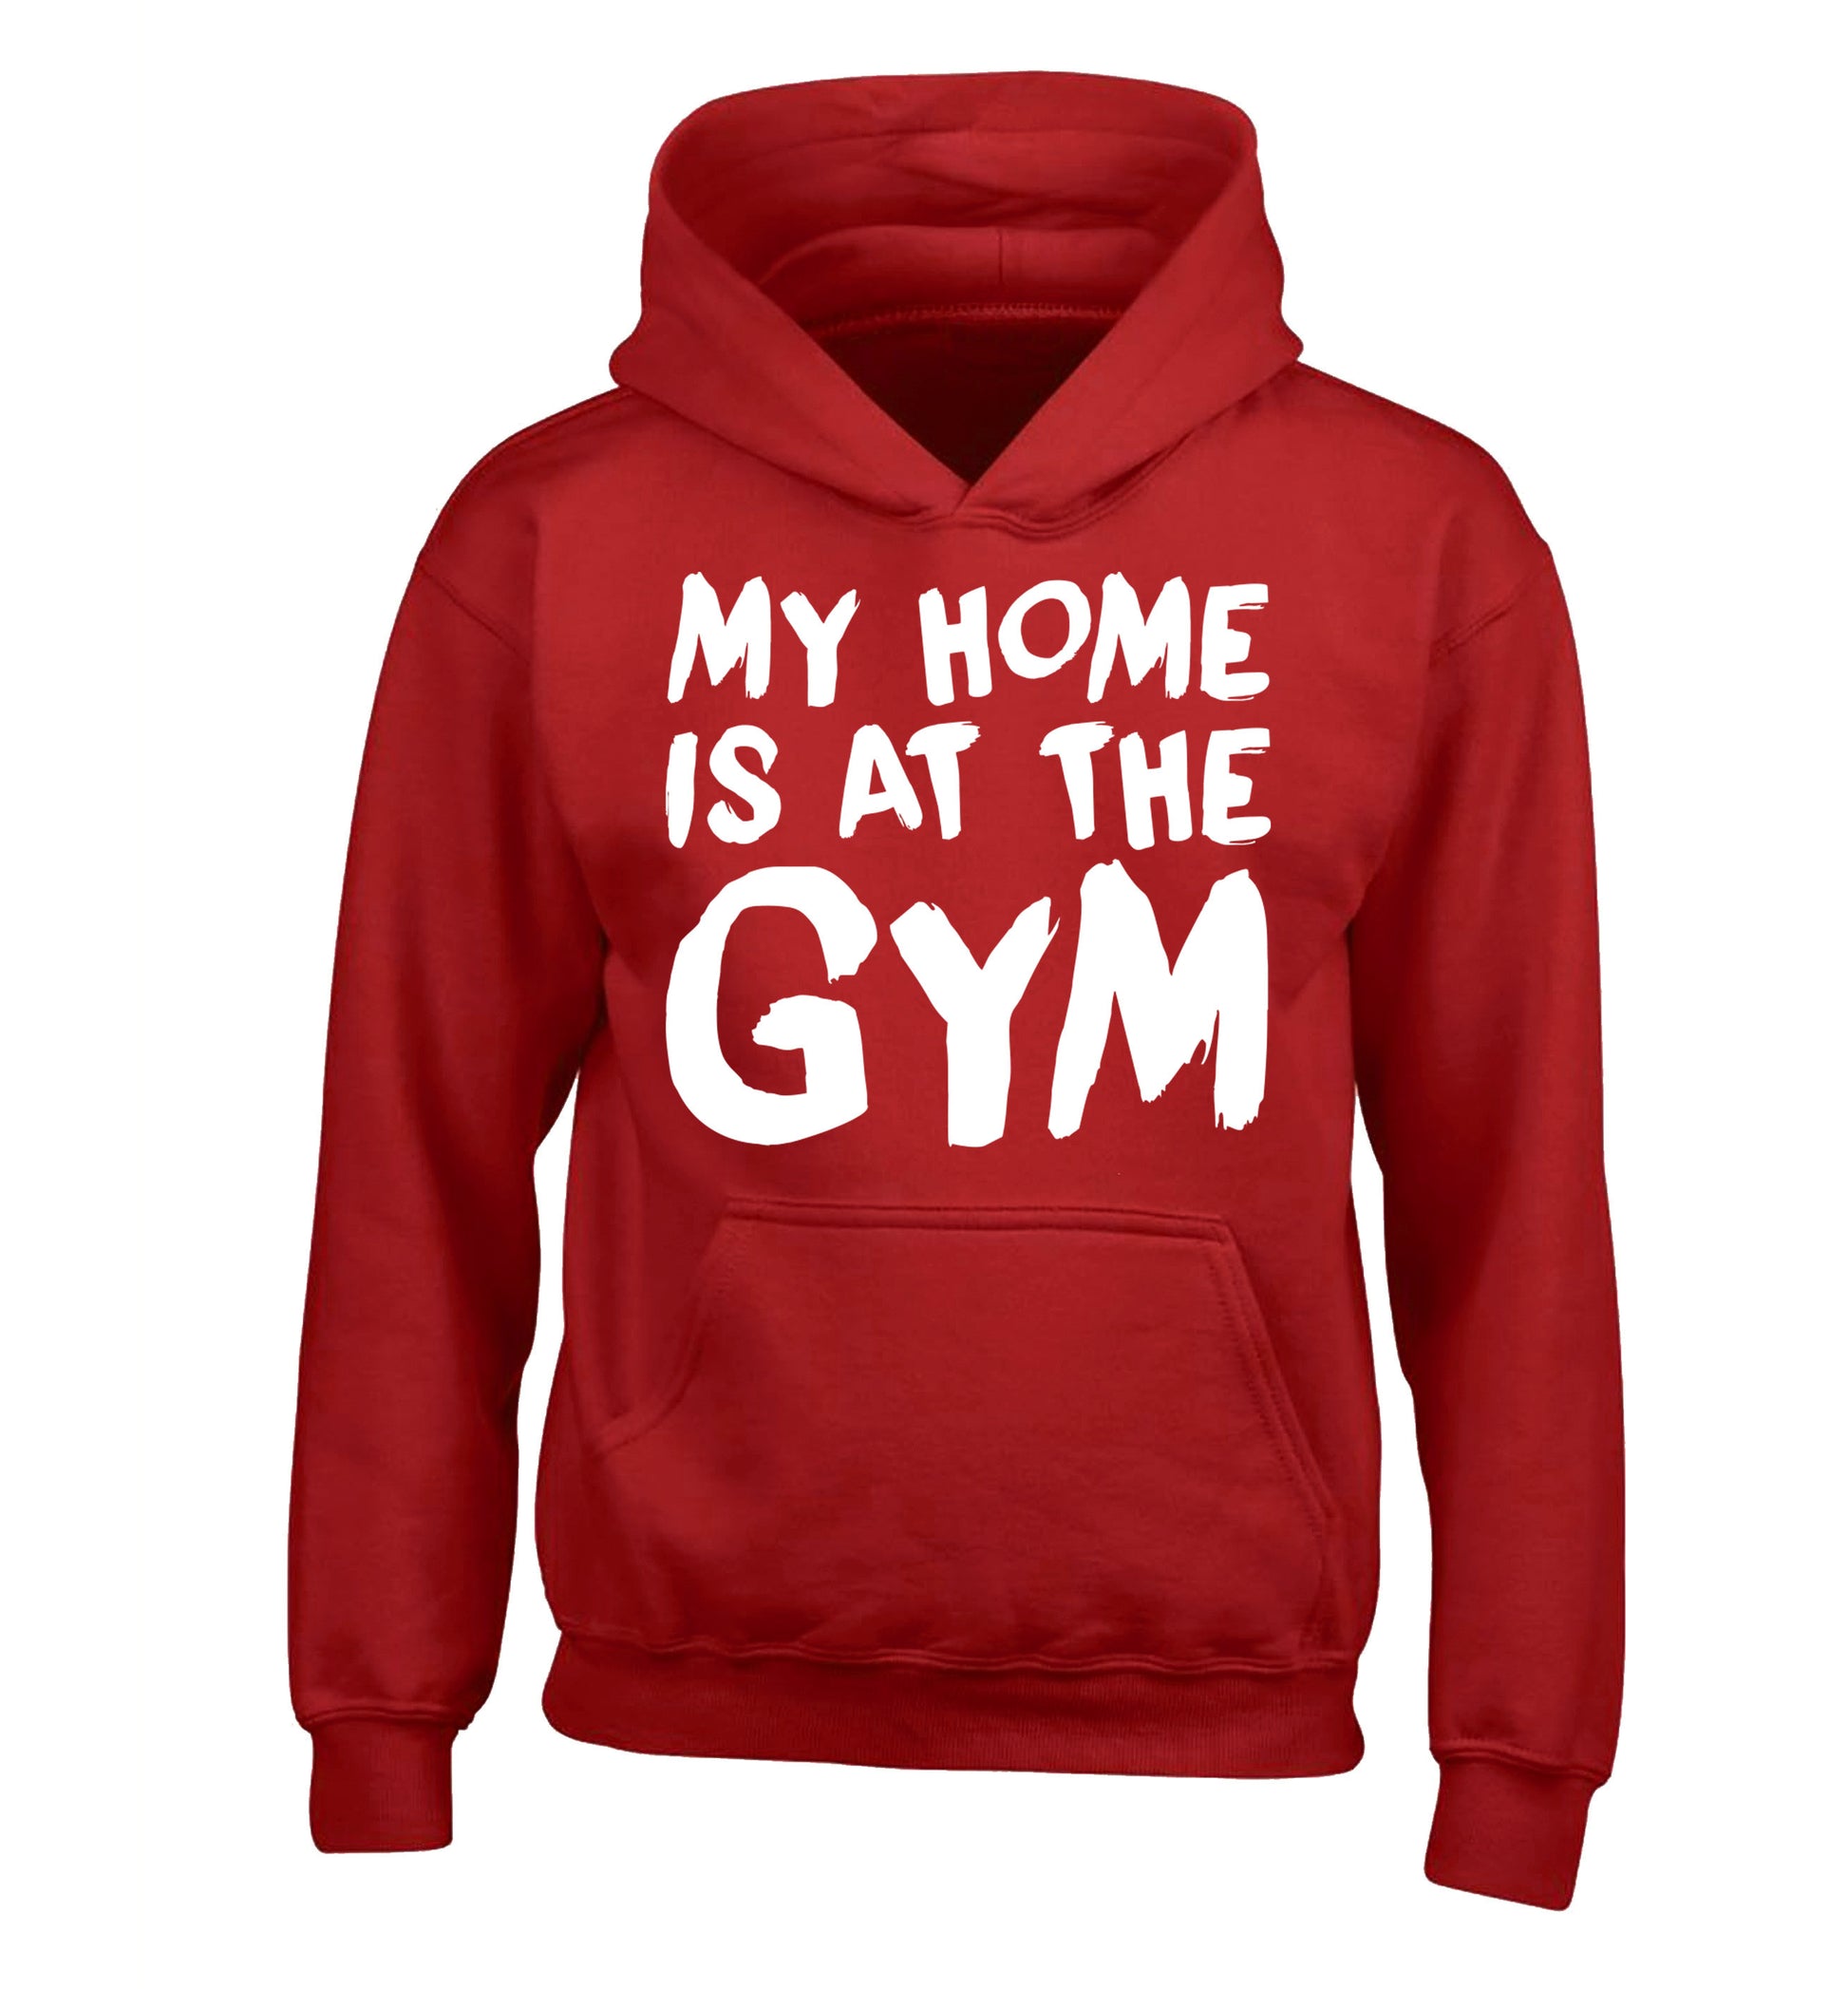 My home is at the gym children's red hoodie 12-14 Years